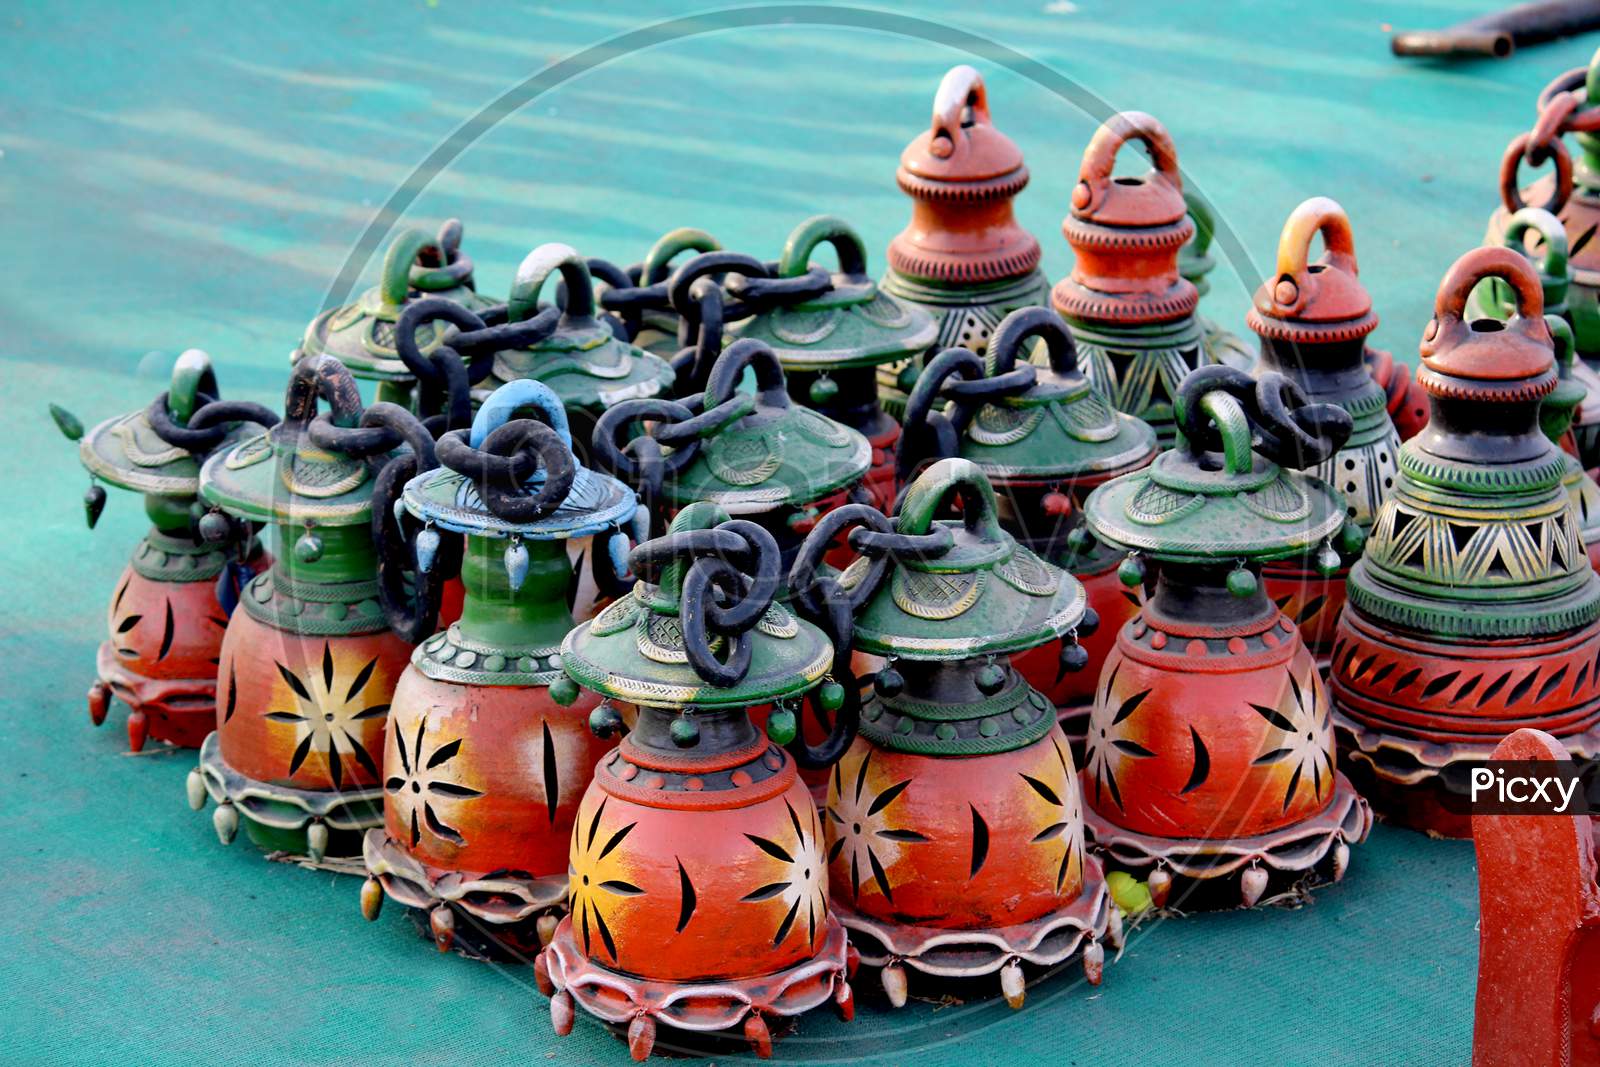 House Decorative Earthenware or Ceramic Items At a Vendor Stall